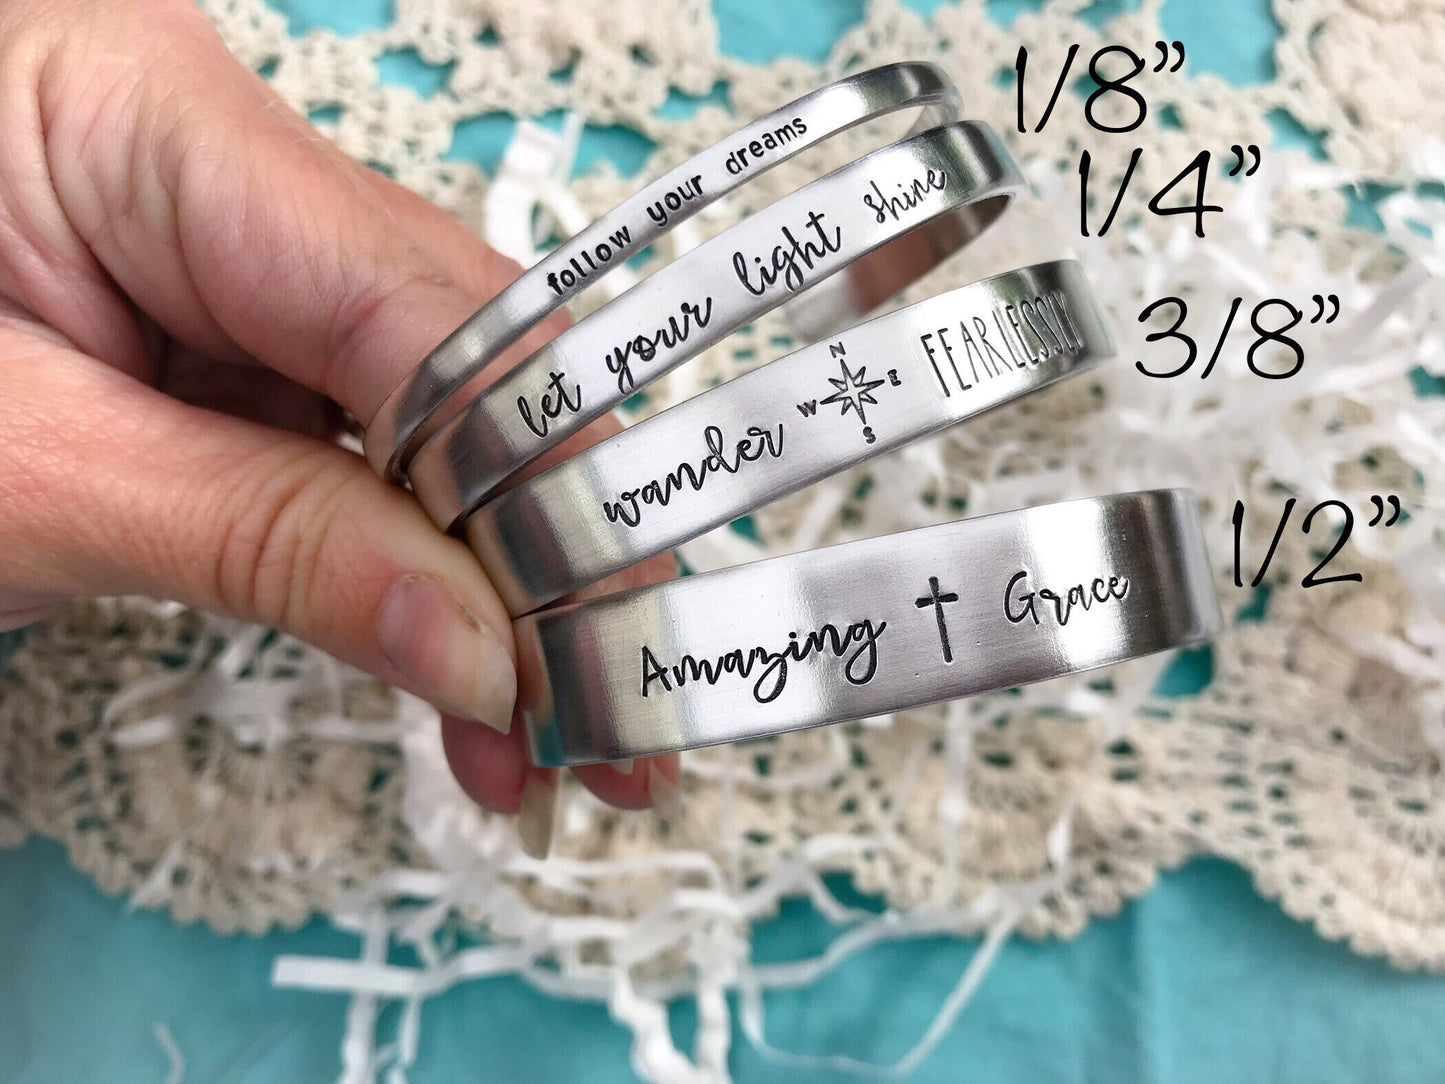 you are amazing.remember that--skinny silver cuff bracelet--hand stamped--encouragement jewelry--friend jewelry--christmas gift